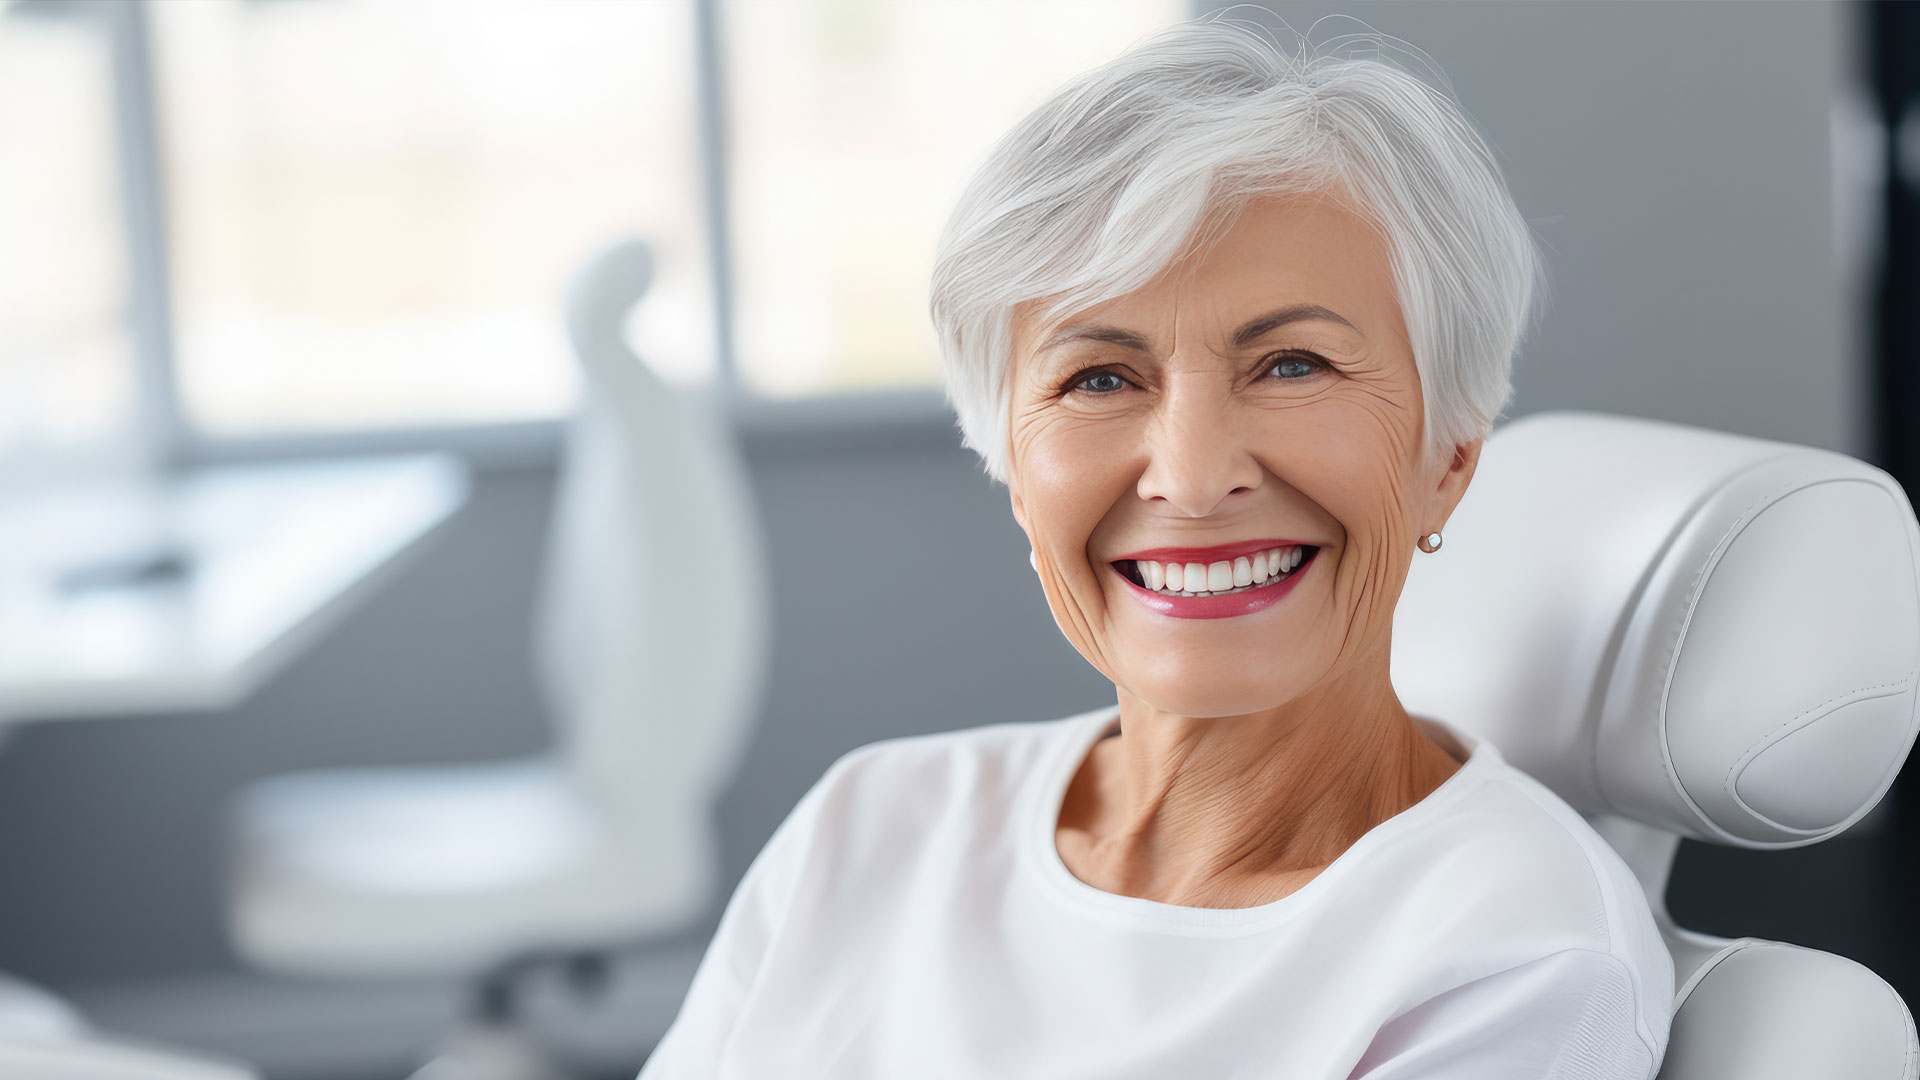 The image shows an elderly woman with white hair, wearing a white top, smiling and looking directly at the camera while seated in a modern dental chair.